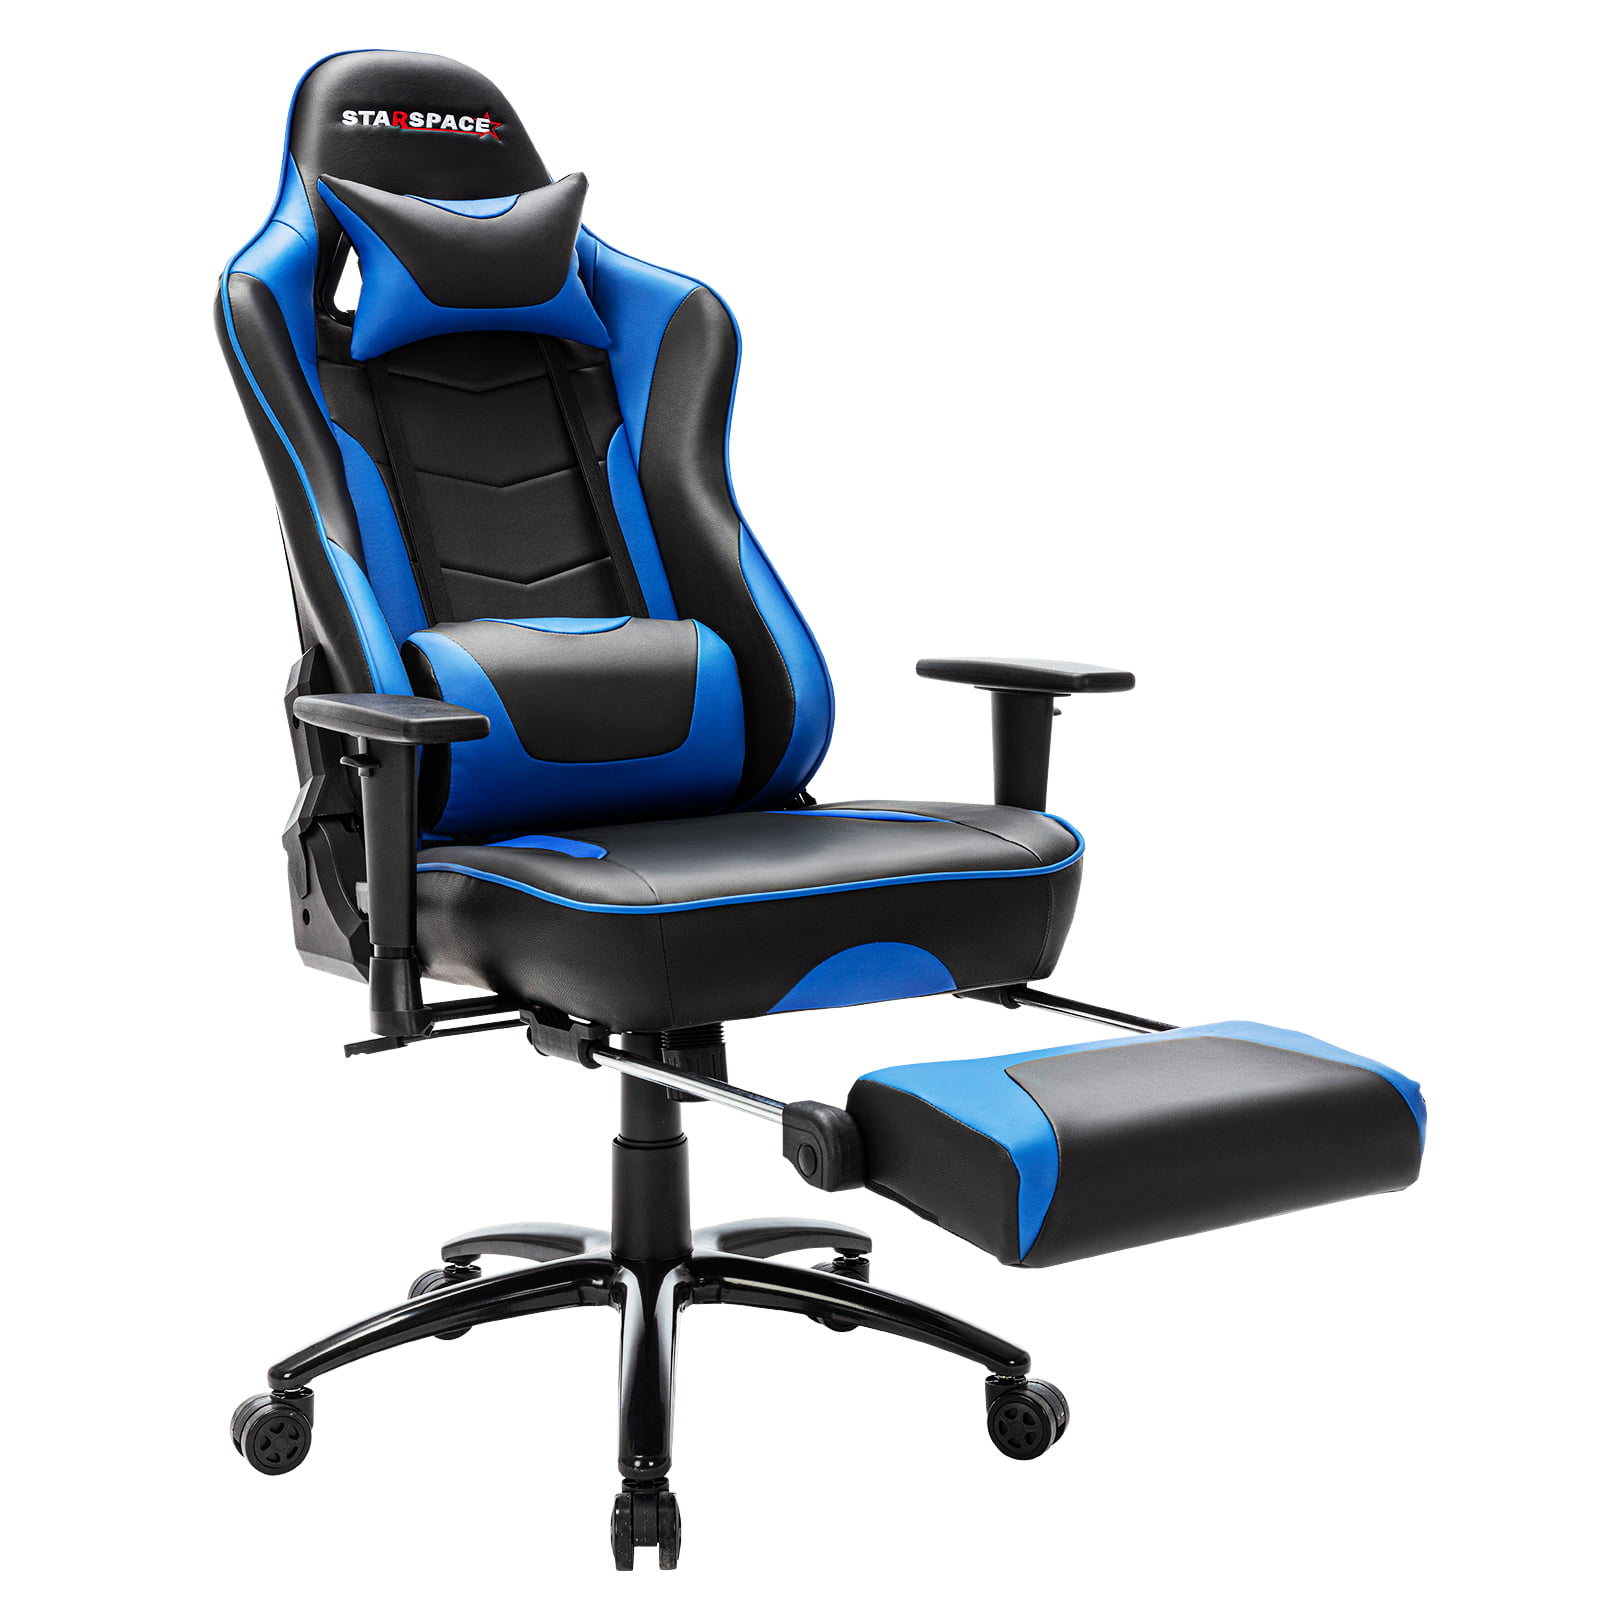 Ergonomic Computer Gaming Chair Office Chair High Back Racing Style PC Chair 